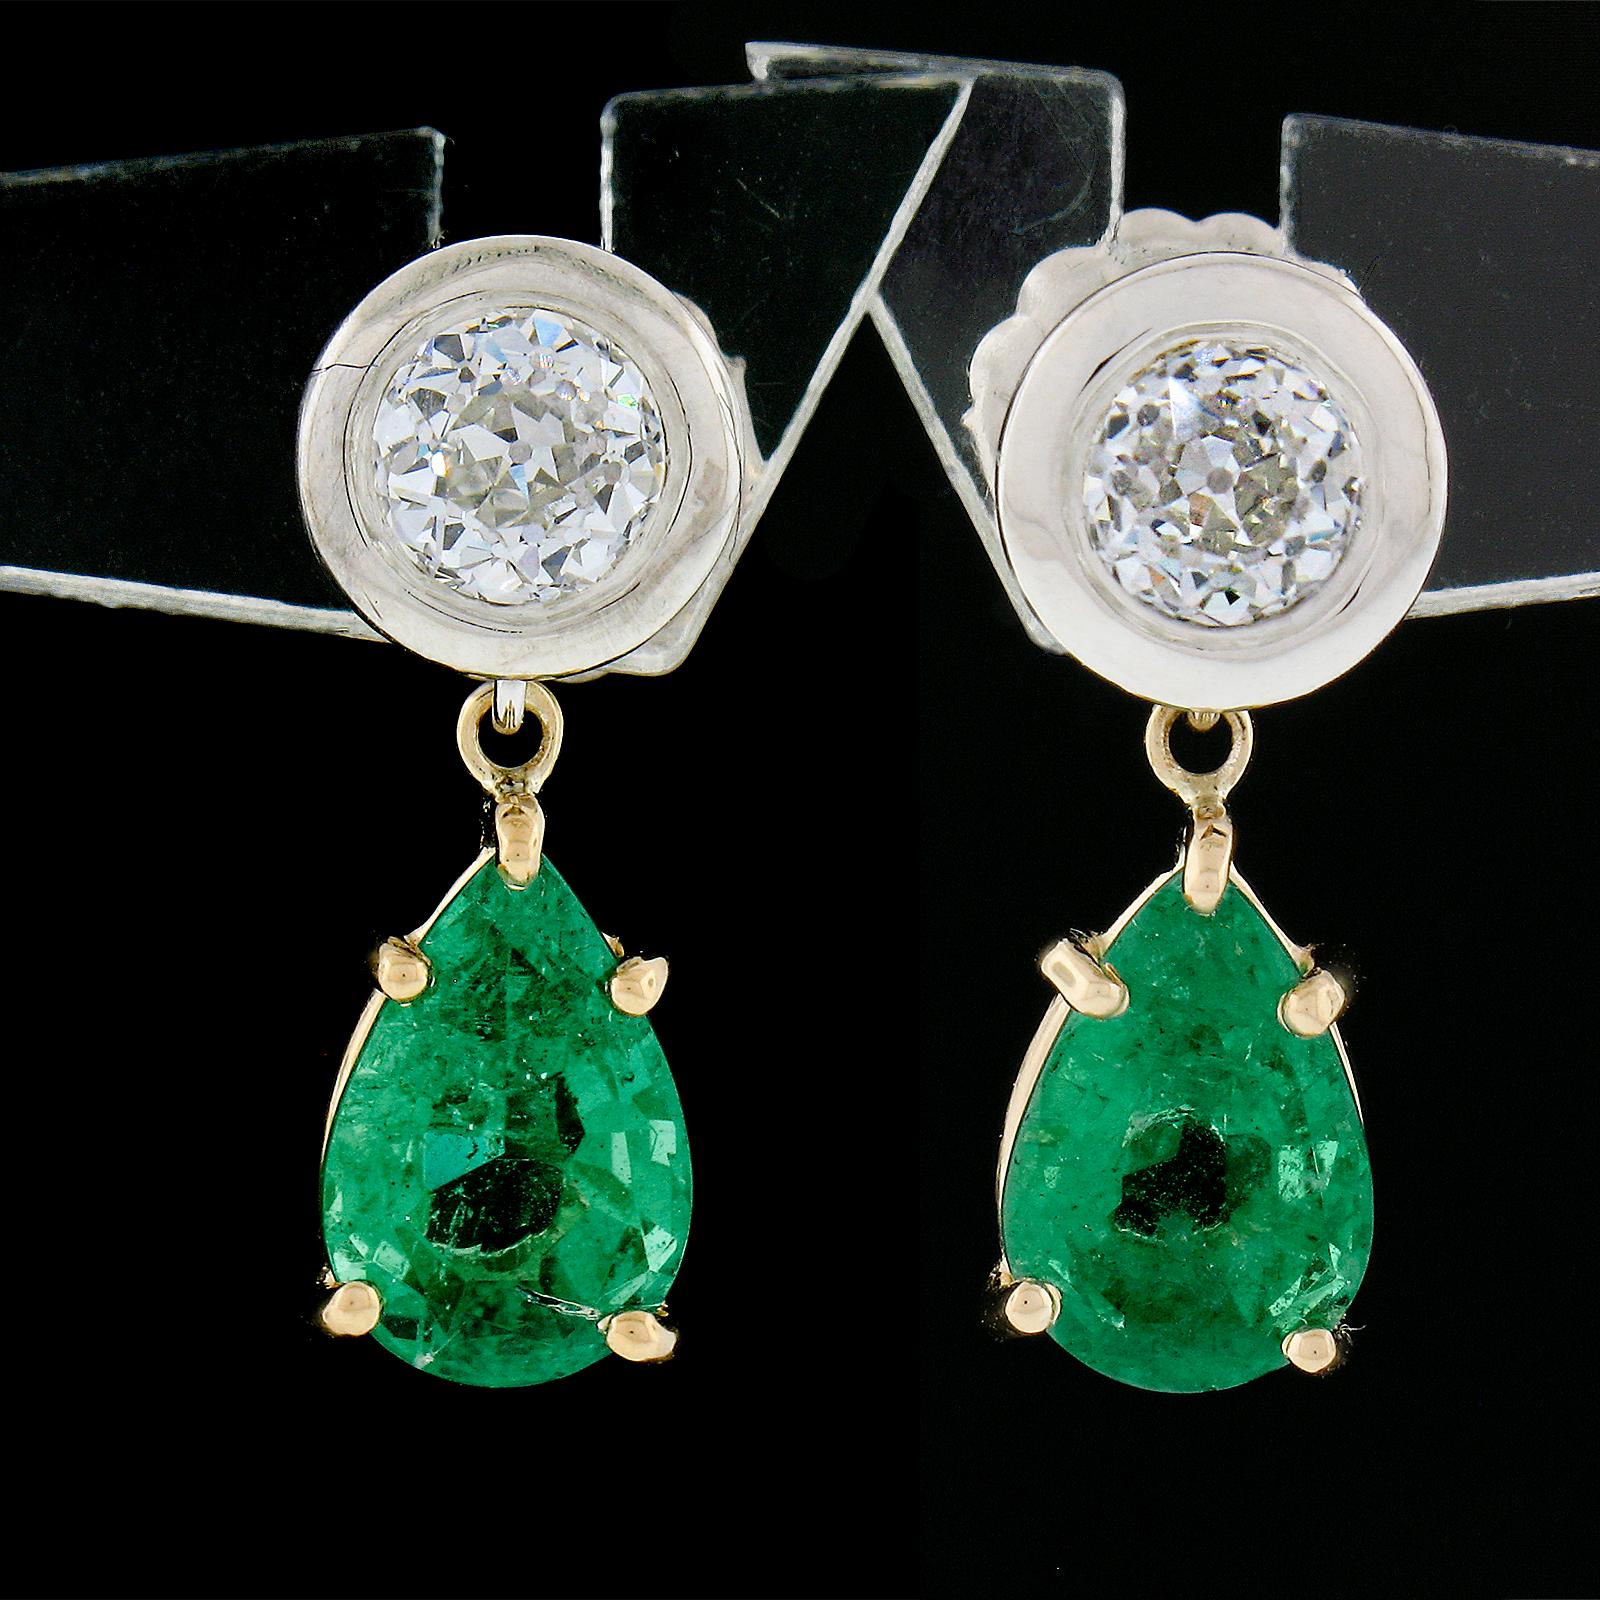 These magnificent brand new earrings were crafted in solid 14k gold and feature old stones with a matching pair of GIA certified pear brilliant cut emeralds prong set in sturdy yellow gold baskets. The emerald stones are a truly breathtaking, super